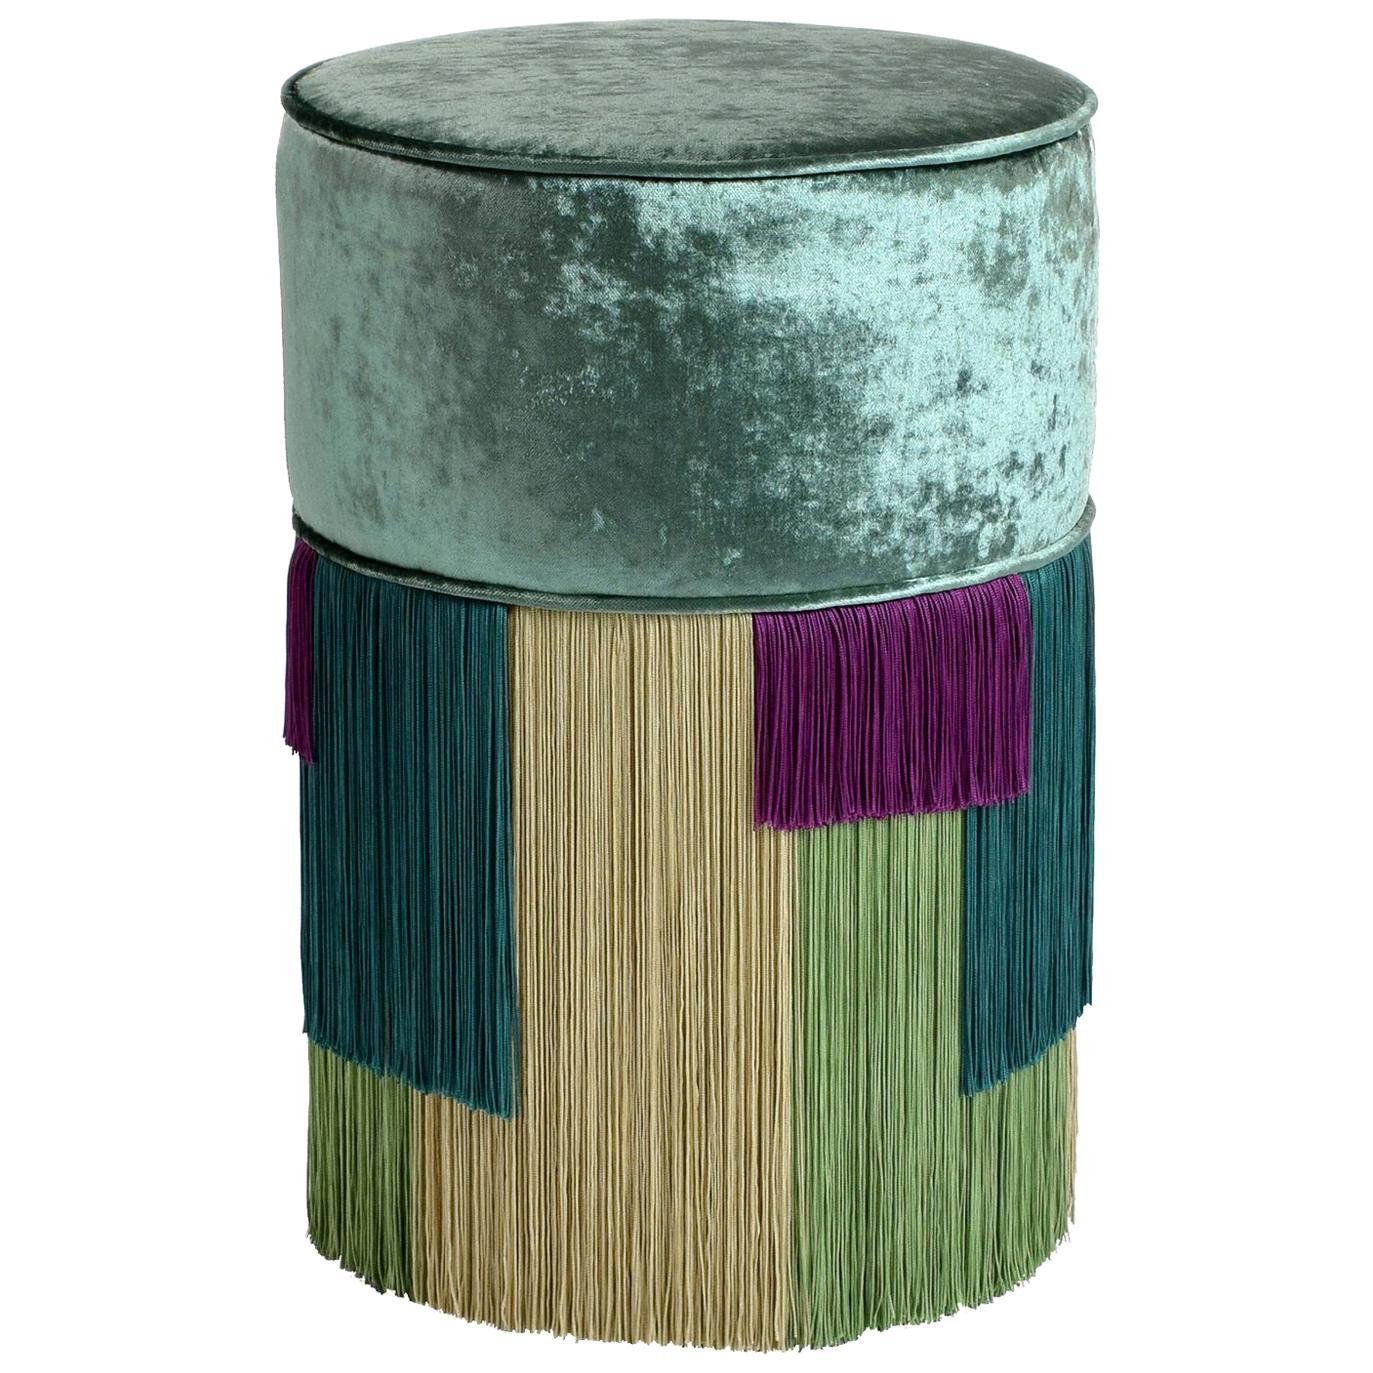 Couture Green Pouf with Geometric Fringe by Lorenza Bozzoli Design